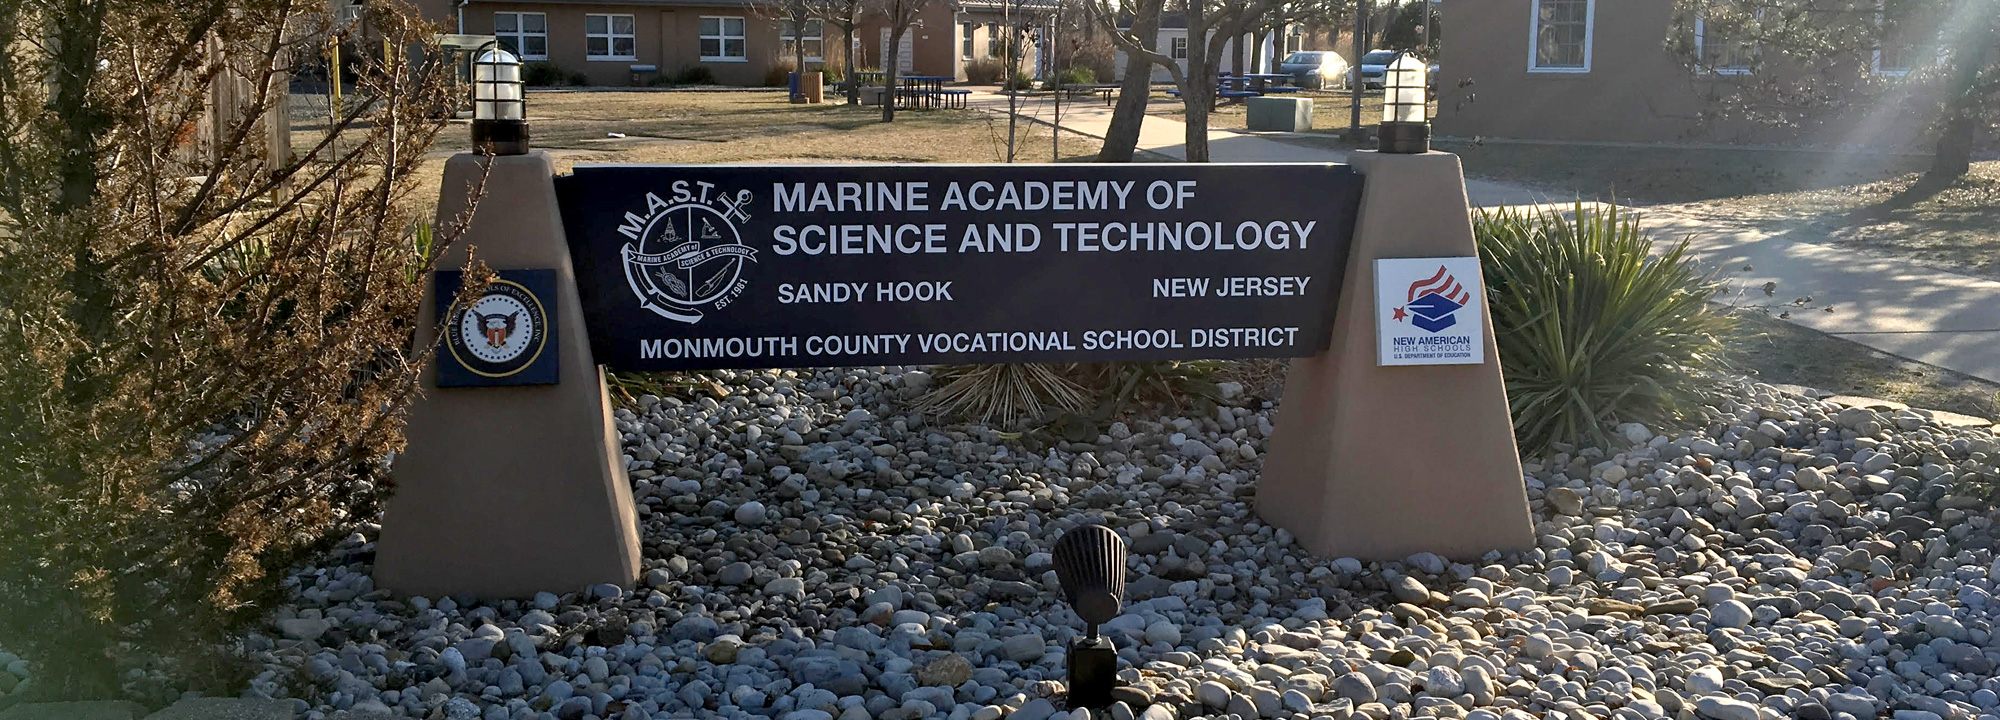 Marine Academy of Science & Technology – Monmouth County Vocational School  District